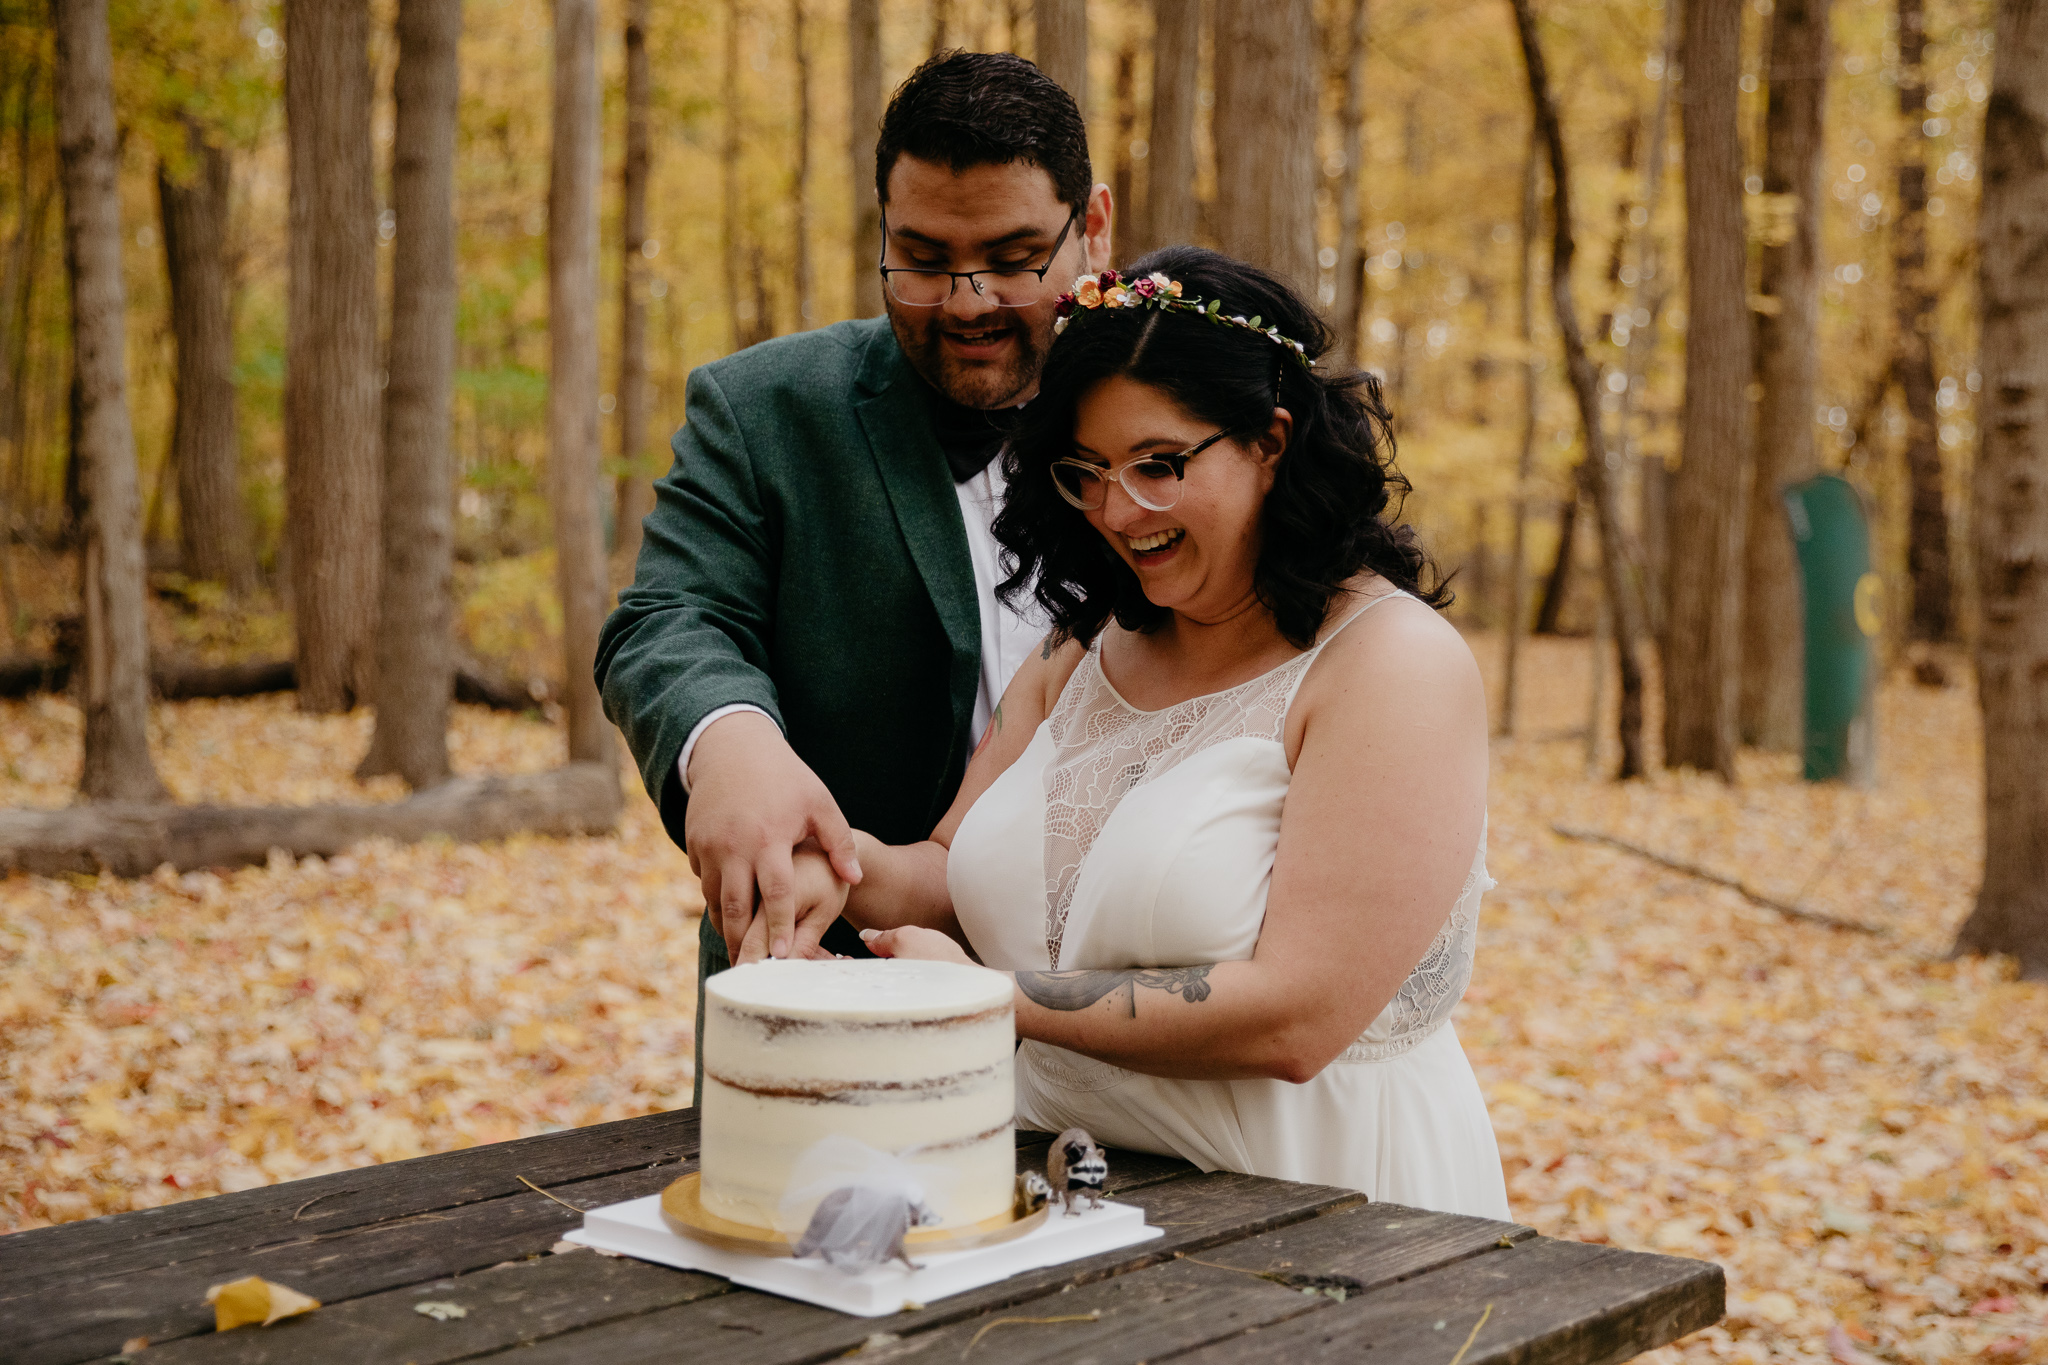 Bride and groom cutting wedding cake at campsite during their autumn Indiana elopement